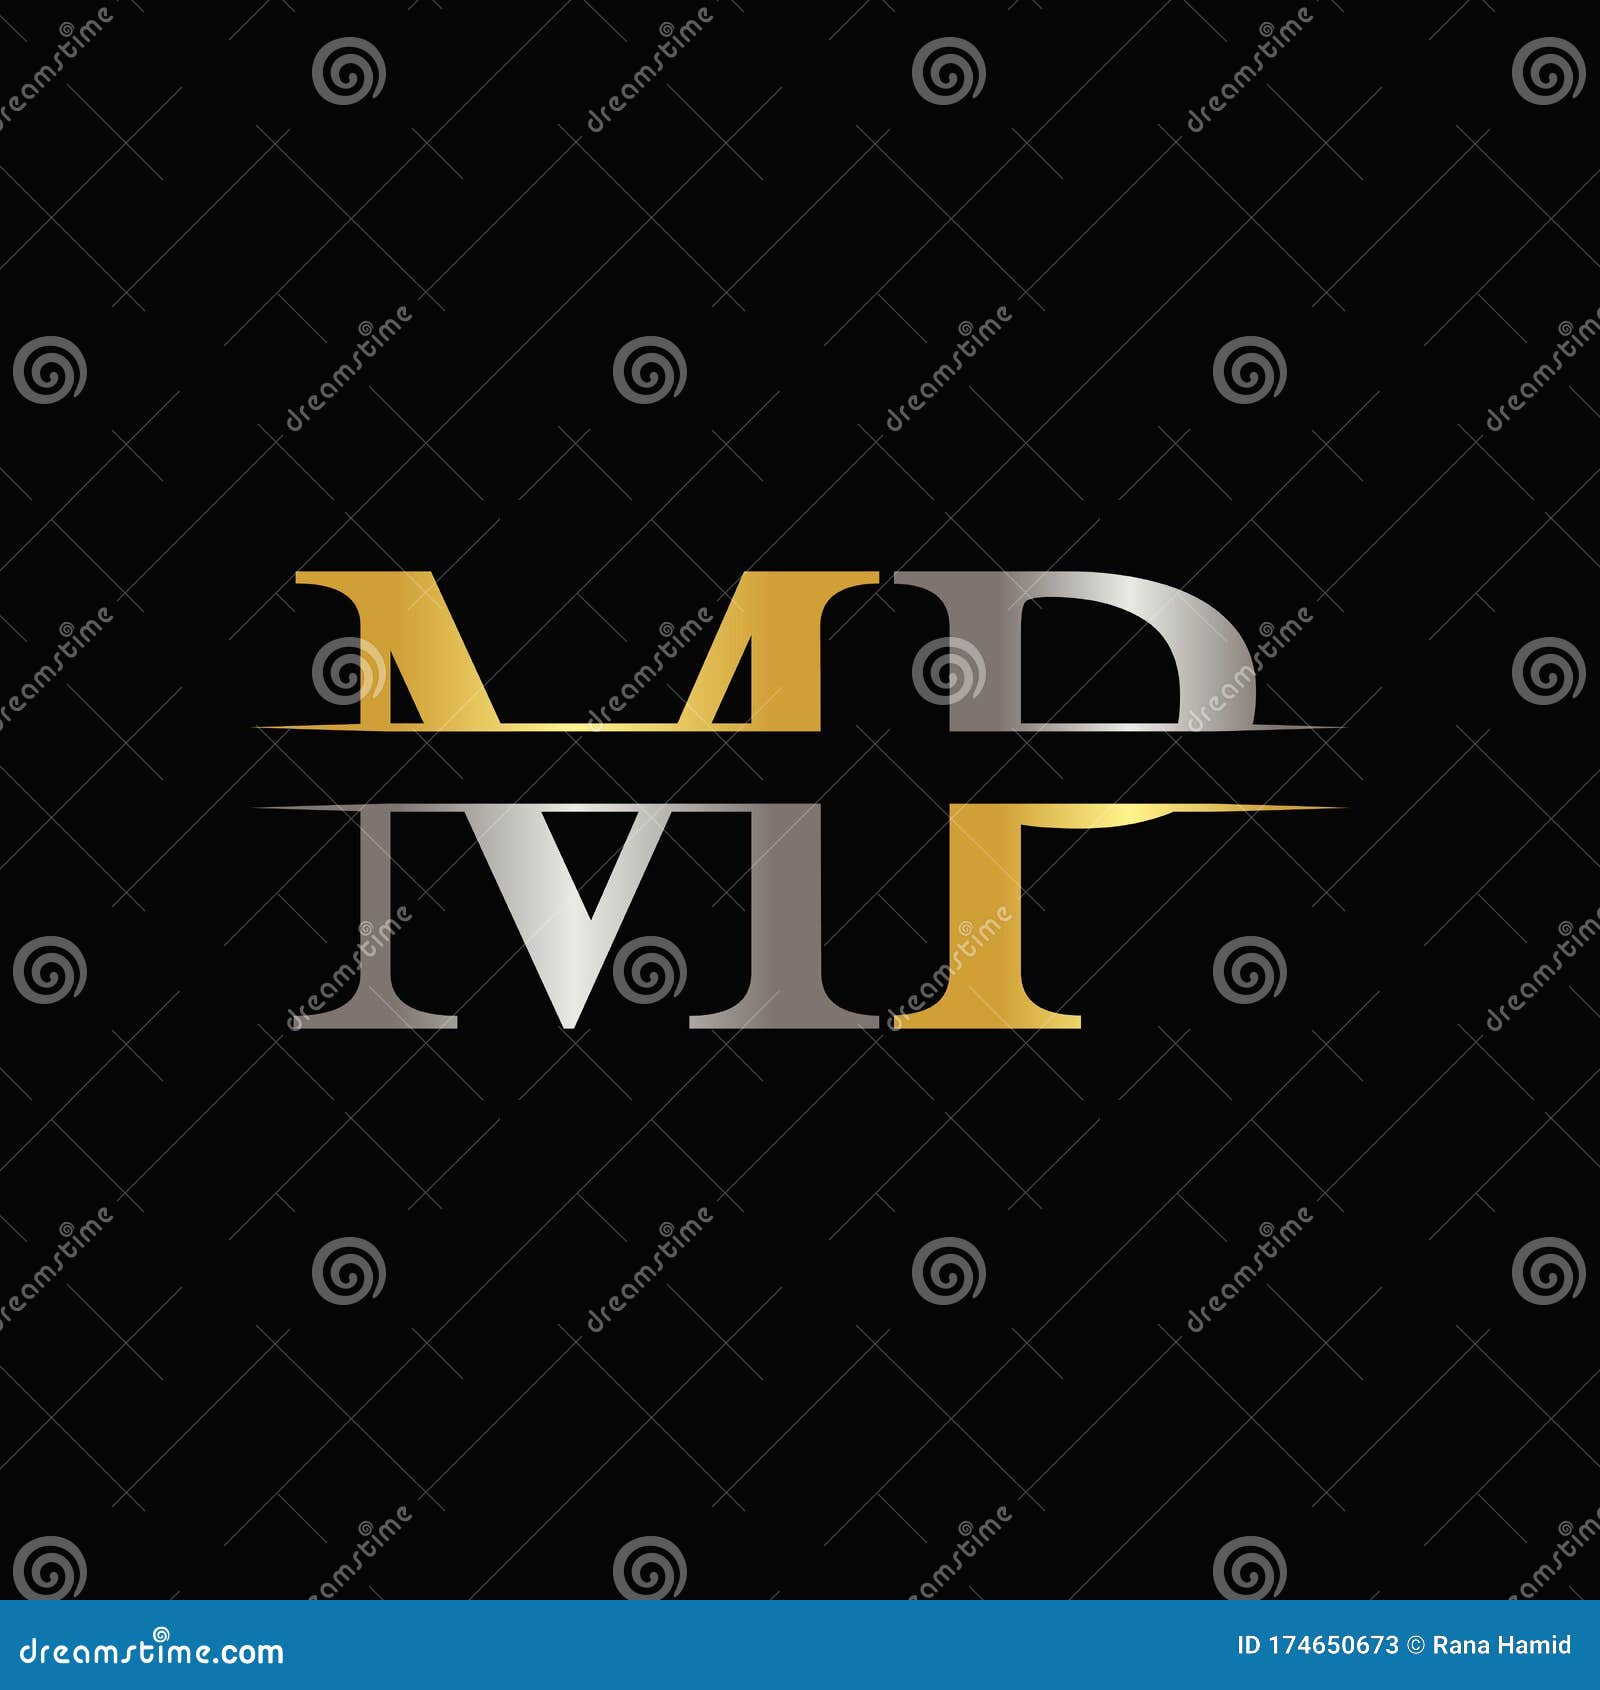 Initial Letter Mp Logo or Pm Logo Vector Design Template Stock